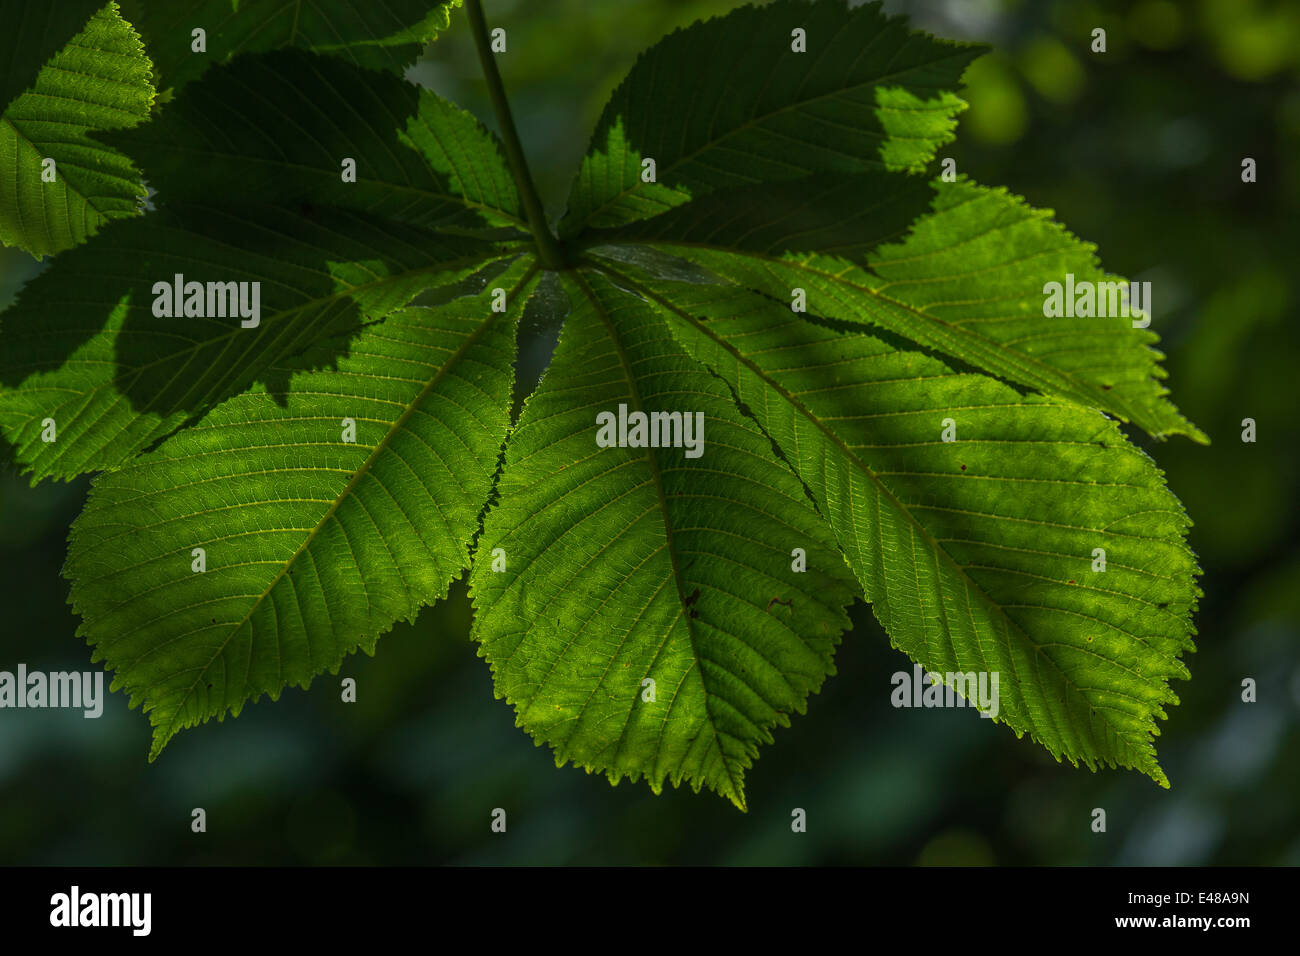 Detail of the leaves of Horse Chestnut / Aesculus hippocastanum best known for its 'conkers' in the autumn. Once used as a medicinal plant. Stock Photo